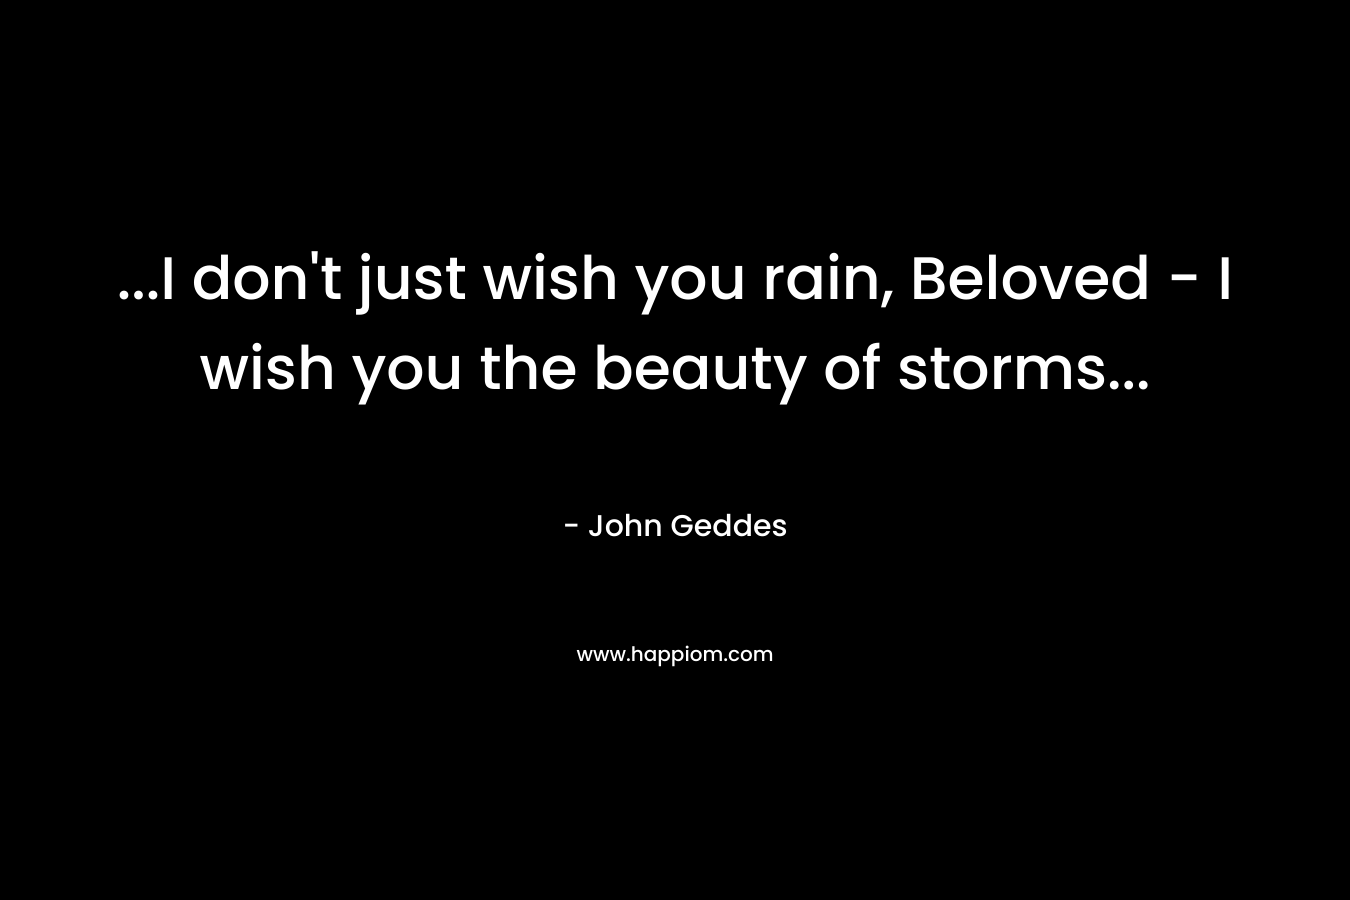 ...I don't just wish you rain, Beloved - I wish you the beauty of storms...